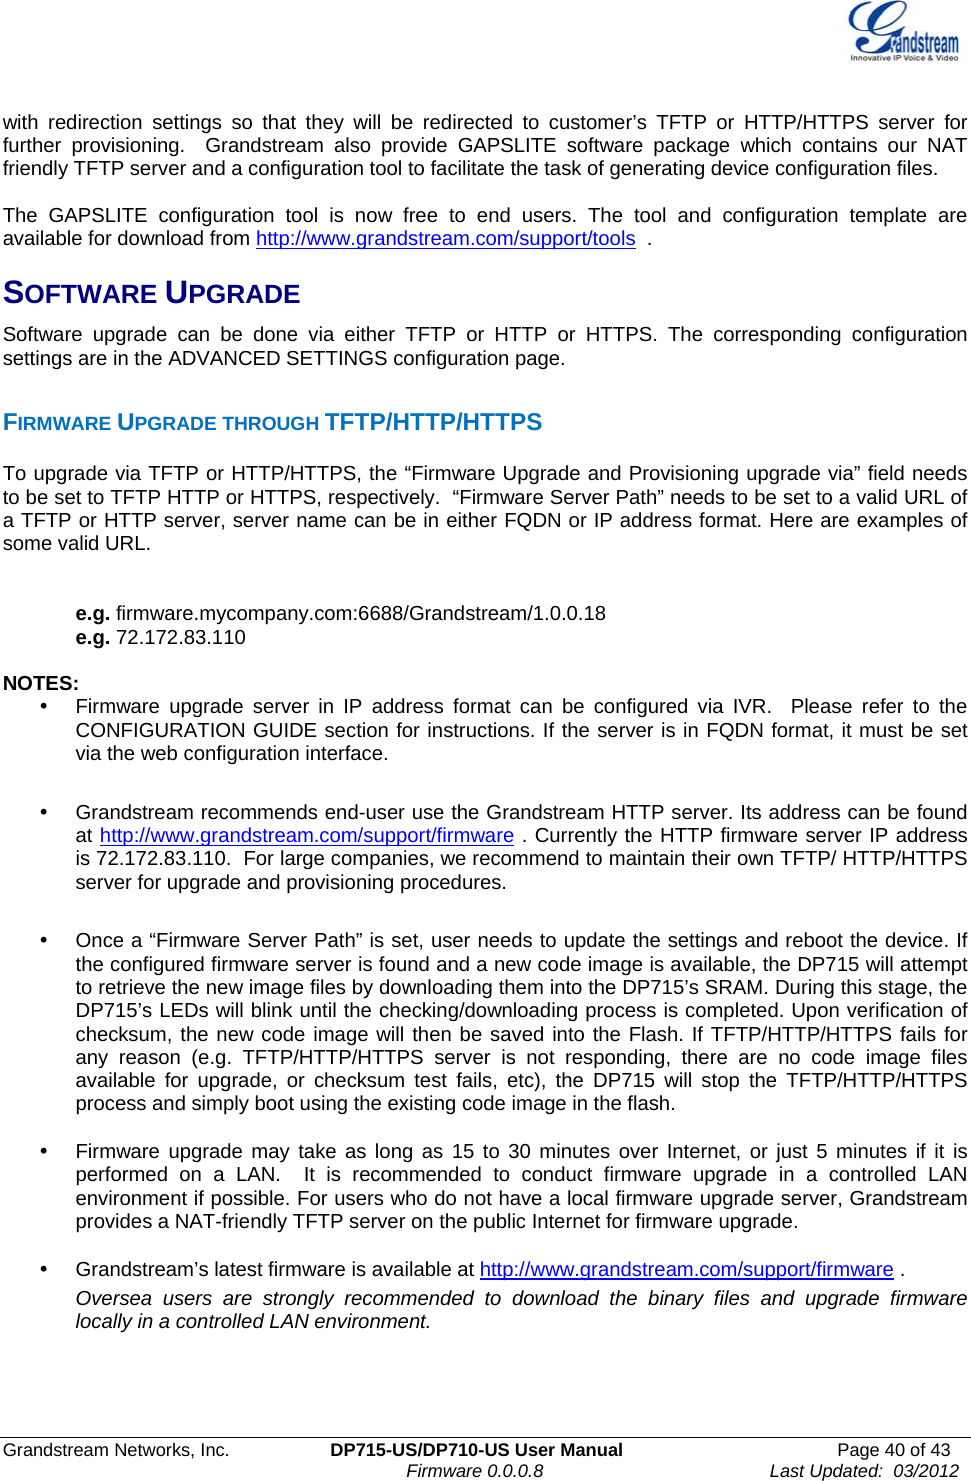  Grandstream Networks, Inc.  DP715-US/DP710-US User Manual  Page 40 of 43                                                                               Firmware 0.0.0.8                                     Last Updated:  03/2012 with redirection settings so that they will be redirected to customer’s TFTP or HTTP/HTTPS server for further provisioning.  Grandstream also provide GAPSLITE software package which contains our NAT friendly TFTP server and a configuration tool to facilitate the task of generating device configuration files.     The GAPSLITE configuration tool is now free to end users. The tool and configuration template are available for download from http://www.grandstream.com/support/tools  .  SOFTWARE UPGRADE Software upgrade can be done via either TFTP or HTTP or HTTPS. The corresponding configuration settings are in the ADVANCED SETTINGS configuration page.   FIRMWARE UPGRADE THROUGH TFTP/HTTP/HTTPS To upgrade via TFTP or HTTP/HTTPS, the “Firmware Upgrade and Provisioning upgrade via” field needs to be set to TFTP HTTP or HTTPS, respectively.  “Firmware Server Path” needs to be set to a valid URL of a TFTP or HTTP server, server name can be in either FQDN or IP address format. Here are examples of some valid URL.     e.g. firmware.mycompany.com:6688/Grandstream/1.0.0.18 e.g. 72.172.83.110   NOTES: y  Firmware upgrade server in IP address format can be configured via IVR.  Please refer to the CONFIGURATION GUIDE section for instructions. If the server is in FQDN format, it must be set via the web configuration interface.  y  Grandstream recommends end-user use the Grandstream HTTP server. Its address can be found at http://www.grandstream.com/support/firmware . Currently the HTTP firmware server IP address is 72.172.83.110.  For large companies, we recommend to maintain their own TFTP/ HTTP/HTTPS server for upgrade and provisioning procedures.  y  Once a “Firmware Server Path” is set, user needs to update the settings and reboot the device. If the configured firmware server is found and a new code image is available, the DP715 will attempt to retrieve the new image files by downloading them into the DP715’s SRAM. During this stage, the DP715’s LEDs will blink until the checking/downloading process is completed. Upon verification of checksum, the new code image will then be saved into the Flash. If TFTP/HTTP/HTTPS fails for any reason (e.g. TFTP/HTTP/HTTPS server is not responding, there are no code image files available for upgrade, or checksum test fails, etc), the DP715 will stop the TFTP/HTTP/HTTPS process and simply boot using the existing code image in the flash.  y  Firmware upgrade may take as long as 15 to 30 minutes over Internet, or just 5 minutes if it is performed on a LAN.  It is recommended to conduct firmware upgrade in a controlled LAN environment if possible. For users who do not have a local firmware upgrade server, Grandstream provides a NAT-friendly TFTP server on the public Internet for firmware upgrade. y  Grandstream’s latest firmware is available at http://www.grandstream.com/support/firmware .  Oversea users are strongly recommended to download the binary files and upgrade firmware locally in a controlled LAN environment.    